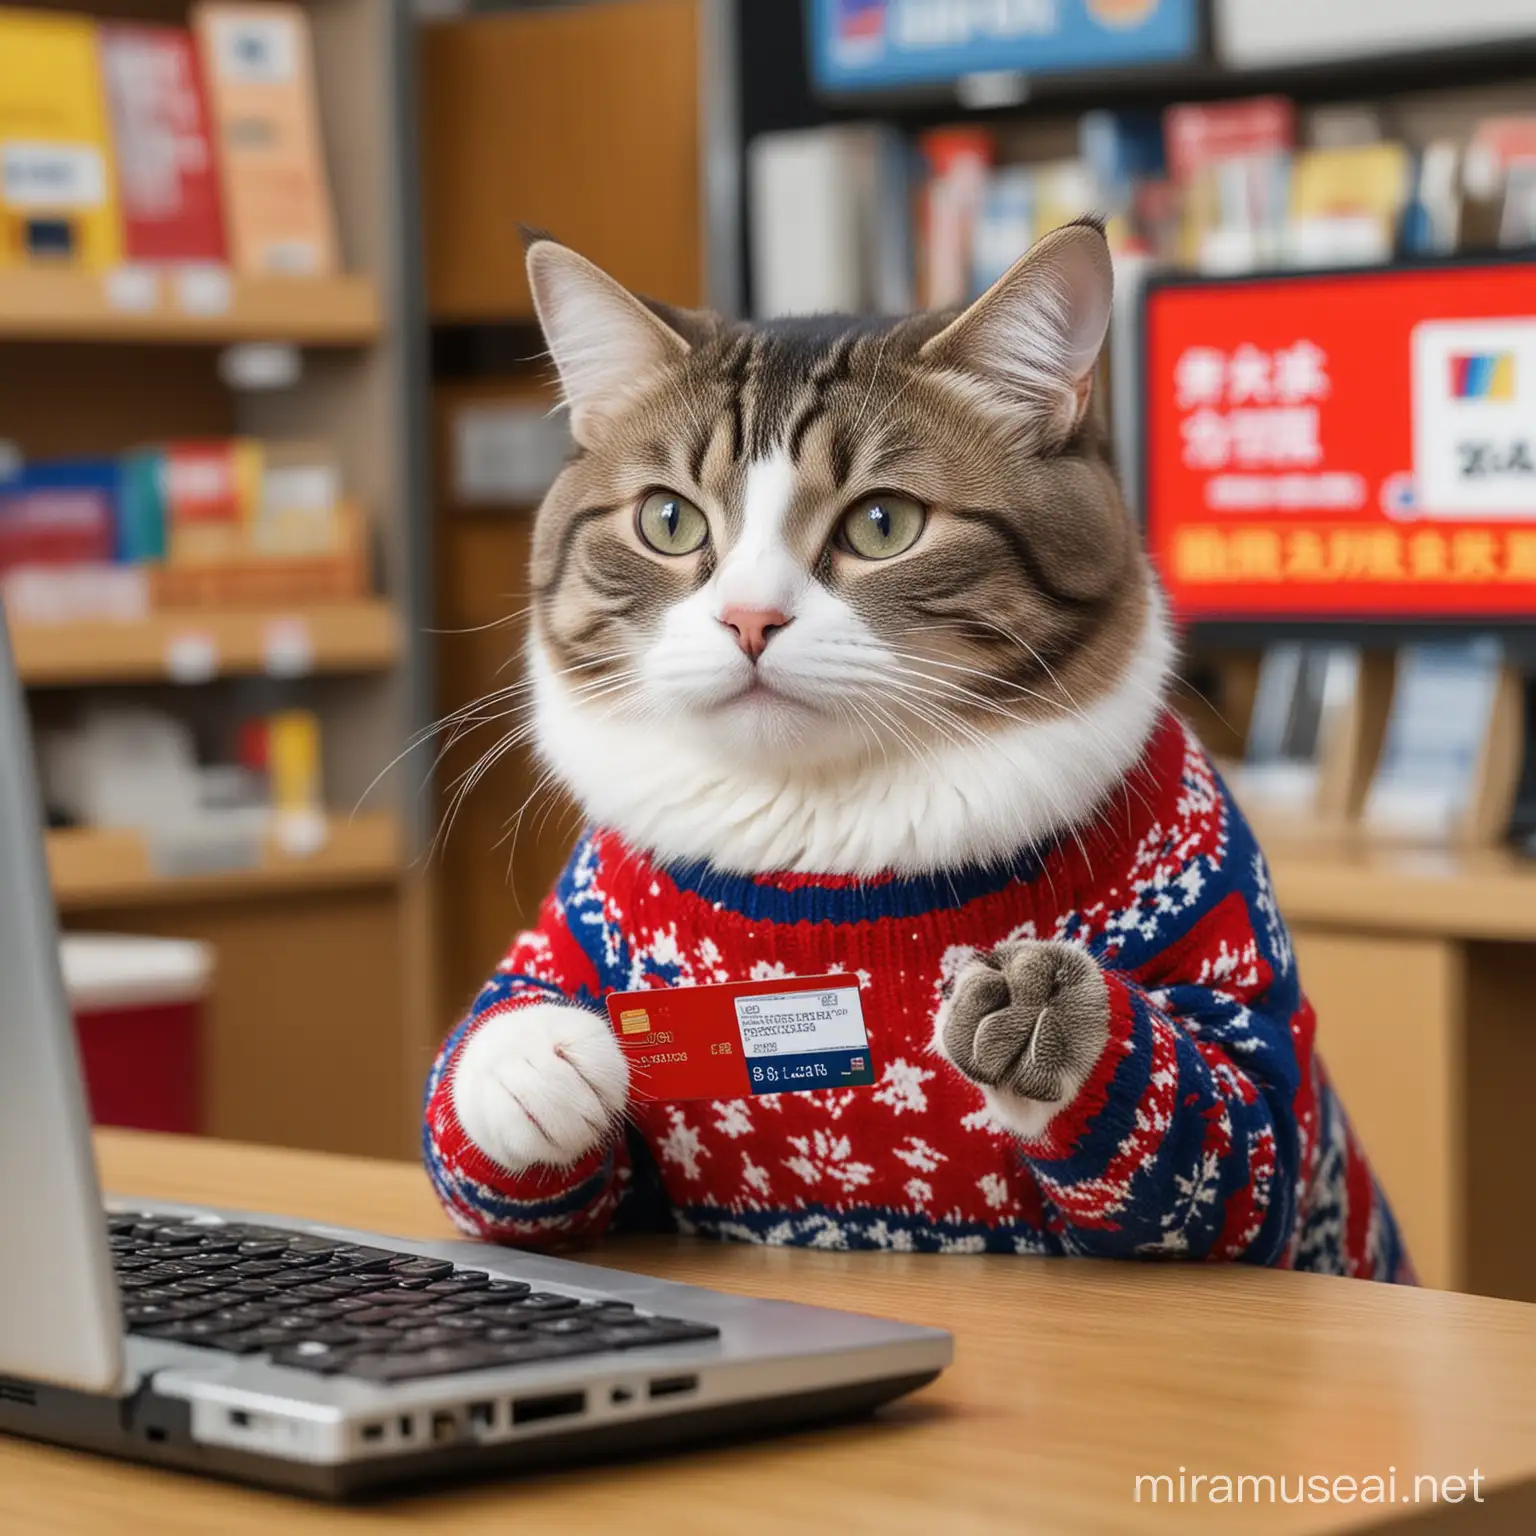 Cat in Sweater Using UnionPay Card at Chinese Store